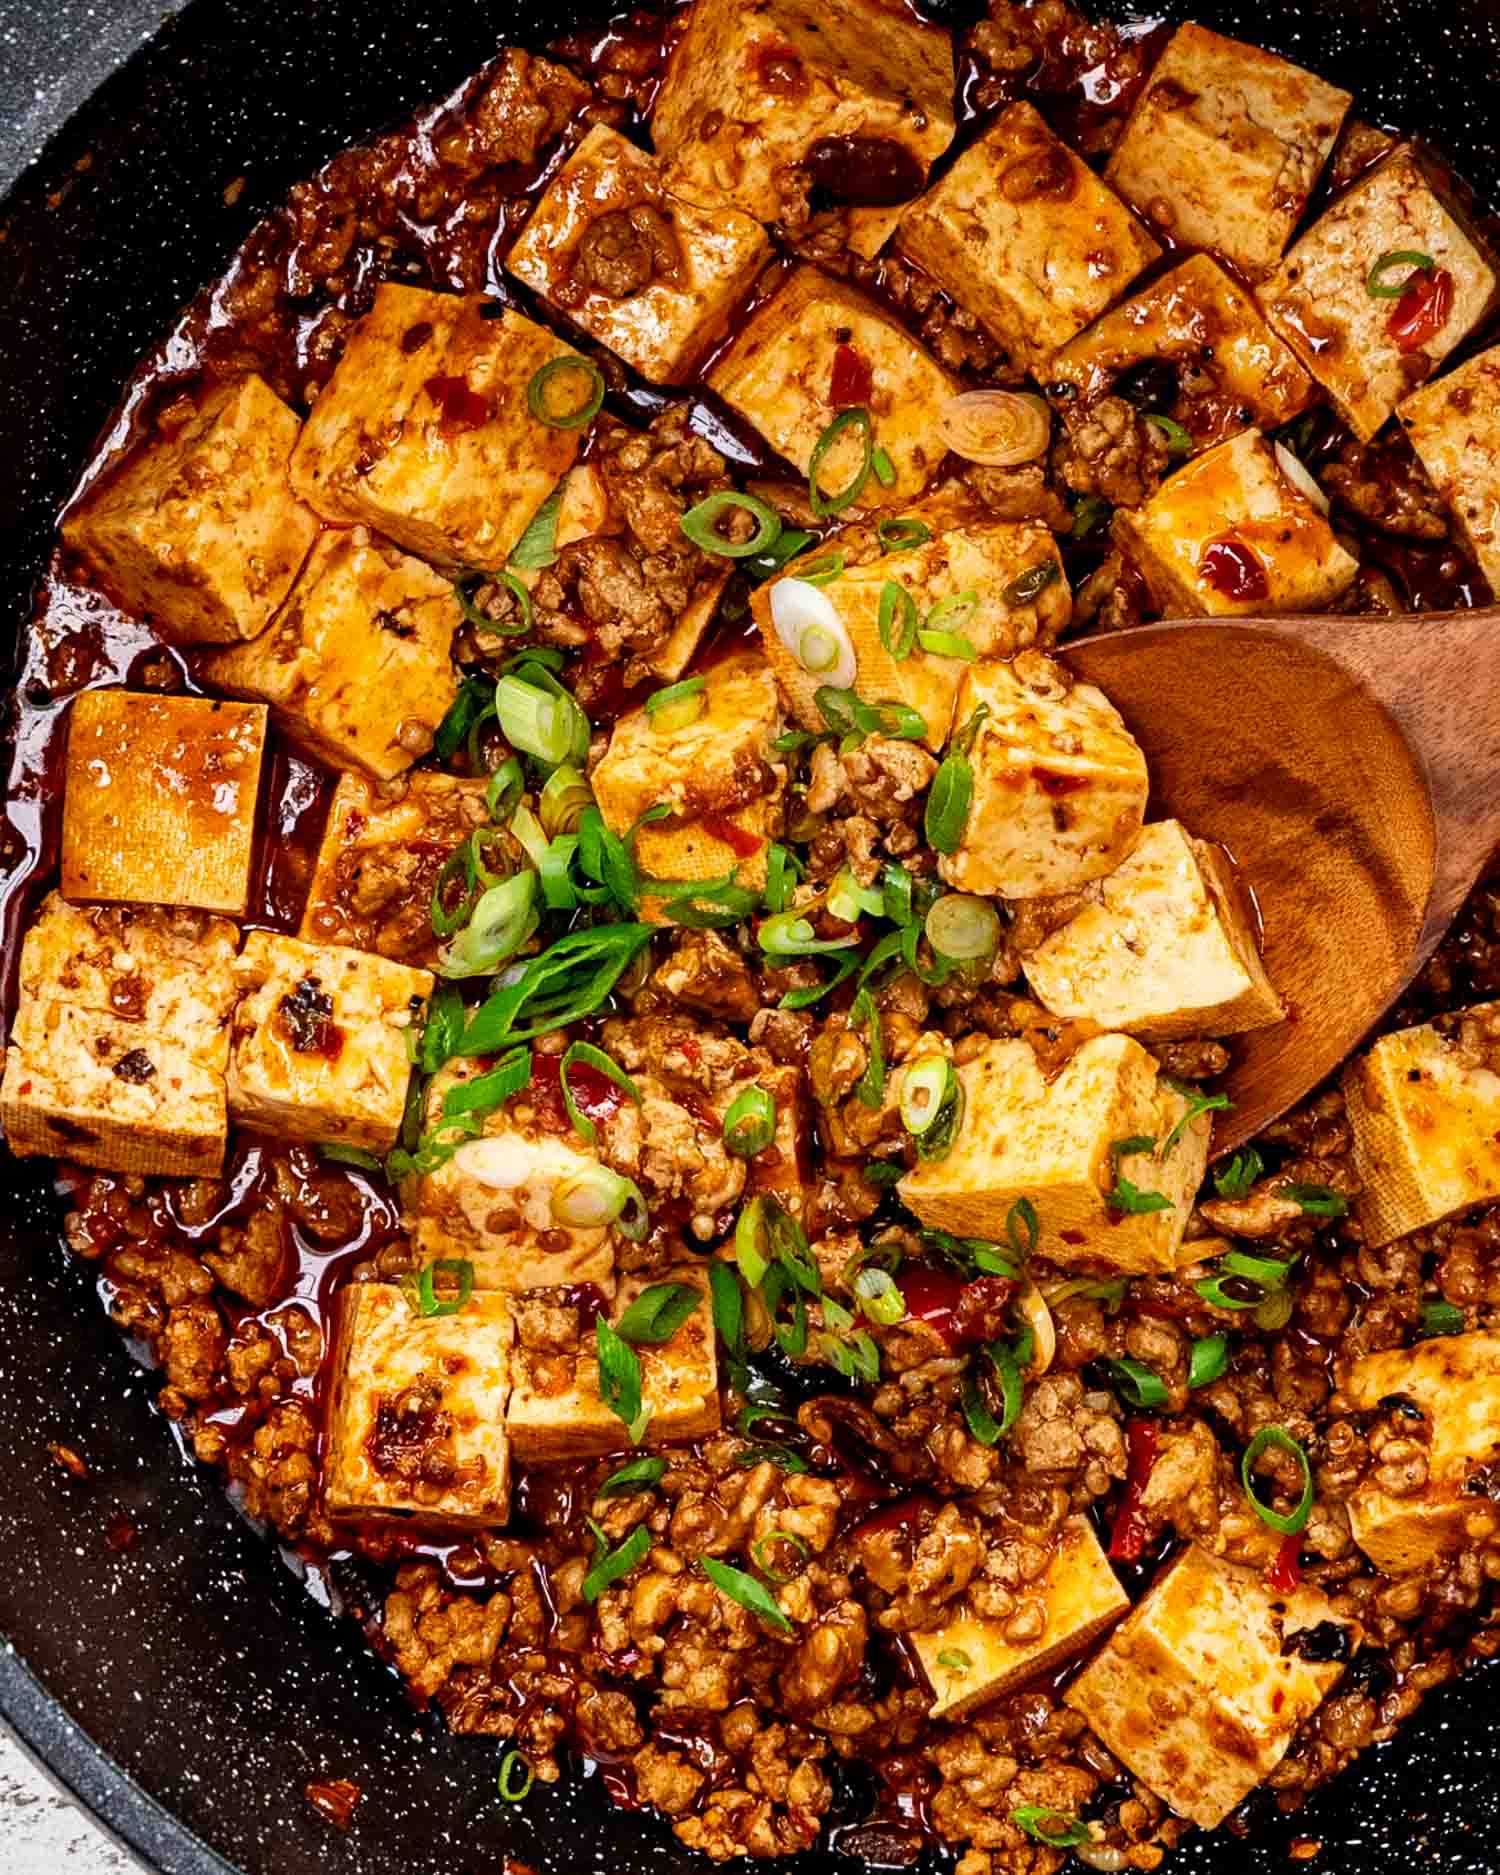 freshly made mapo tofu garnished with green onions in a skillet.